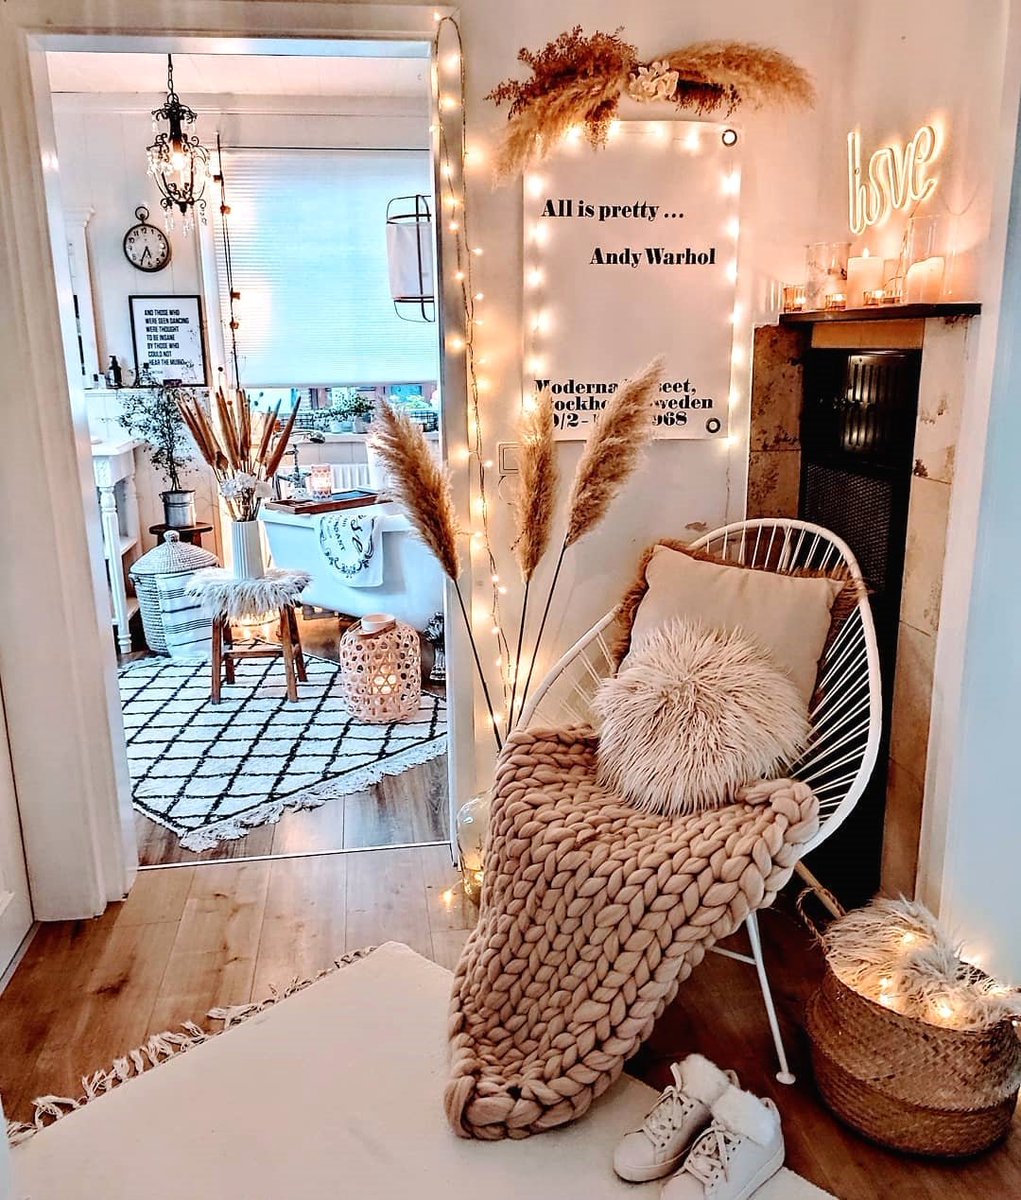 Wonderful combination of beige/warm white in the front and blue/cyan in the background of the image.
.
.
.
.
.
#homedecor #decor #lights #interiors #homedesign #deco #lighting #cozy #cosy #hygge #homedecoration #homedecorations #myhyggehome #houseenvy #snugasabug #decorcrushing